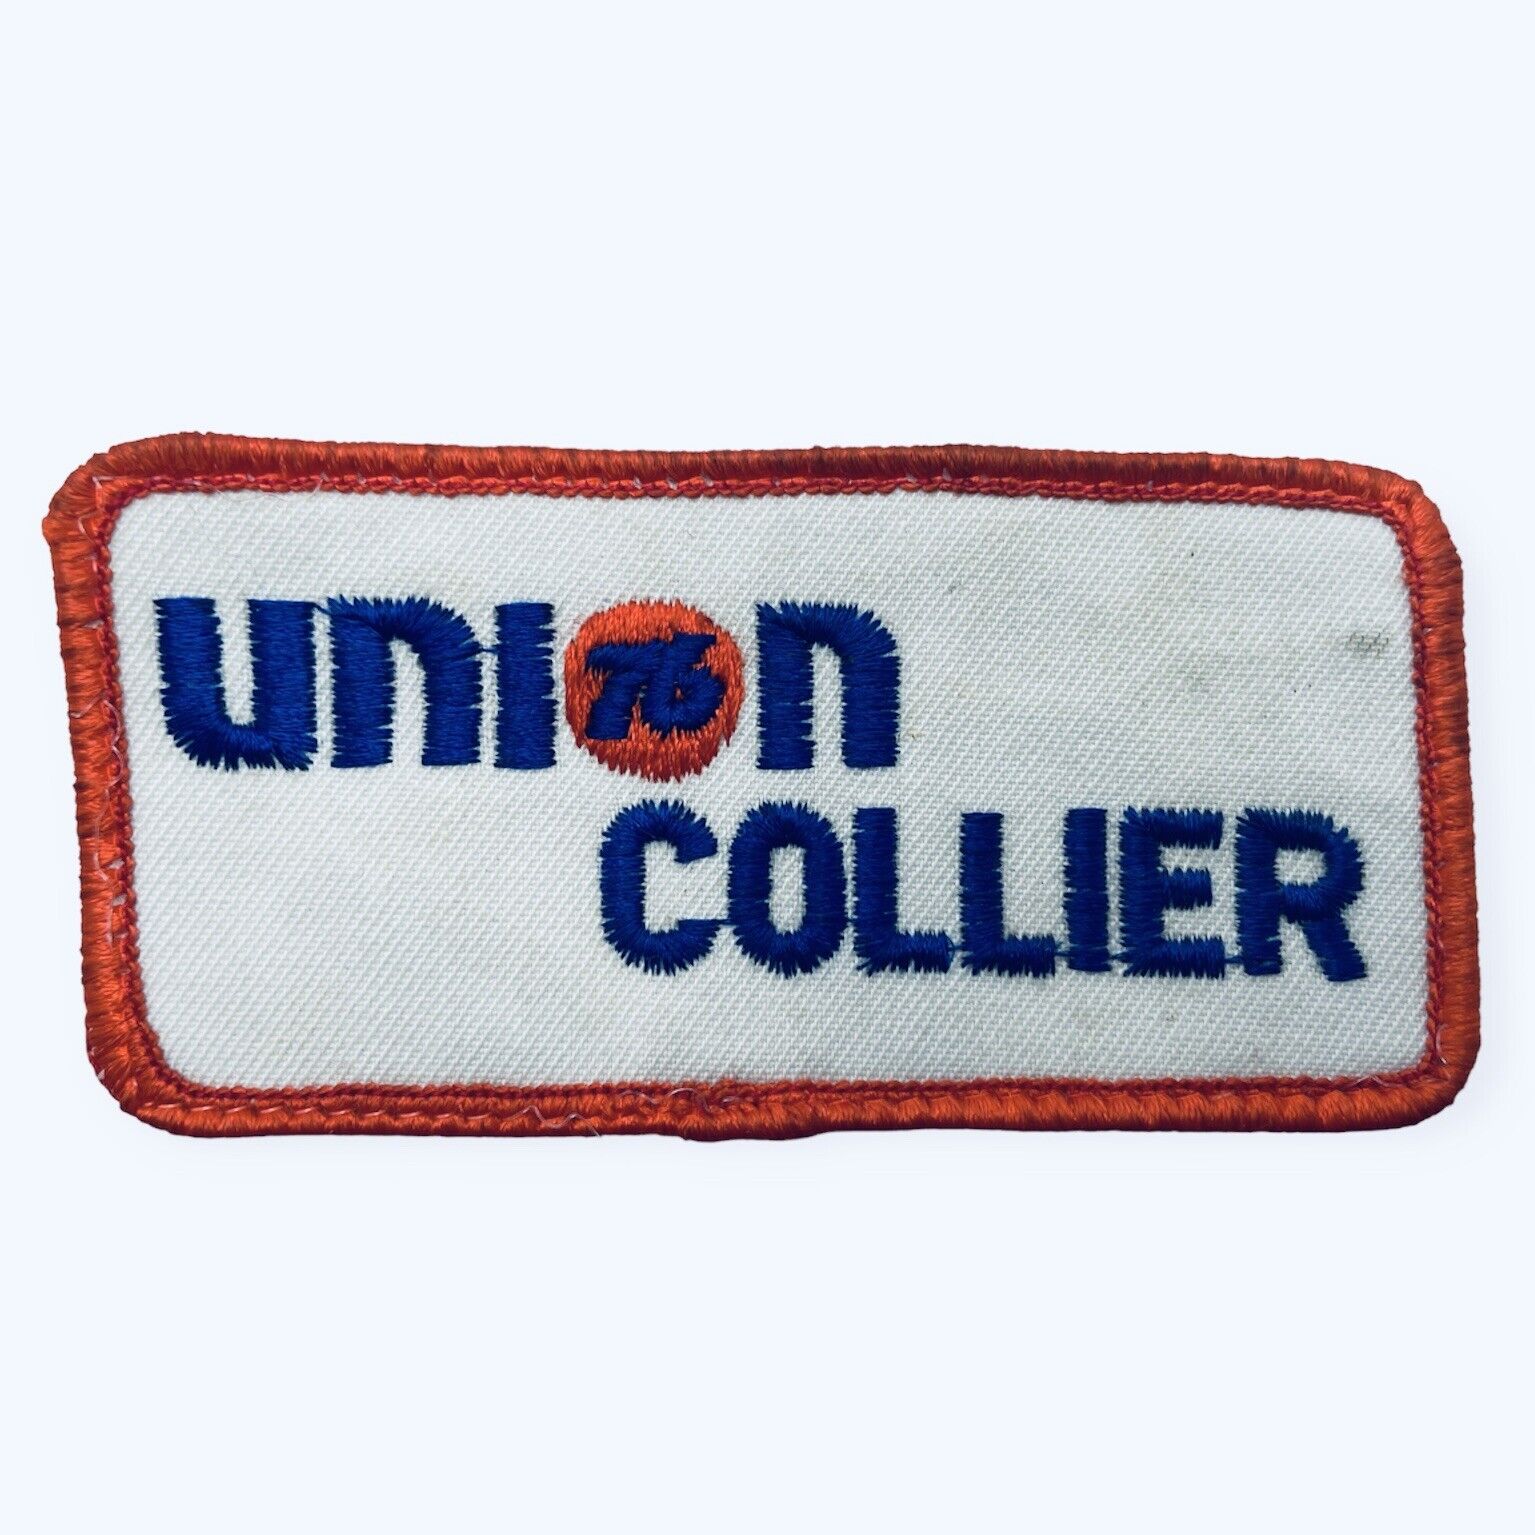 Vintage 1980’s Union Collier 76 Patch 4” X 2” White Orange Blue Embroidered